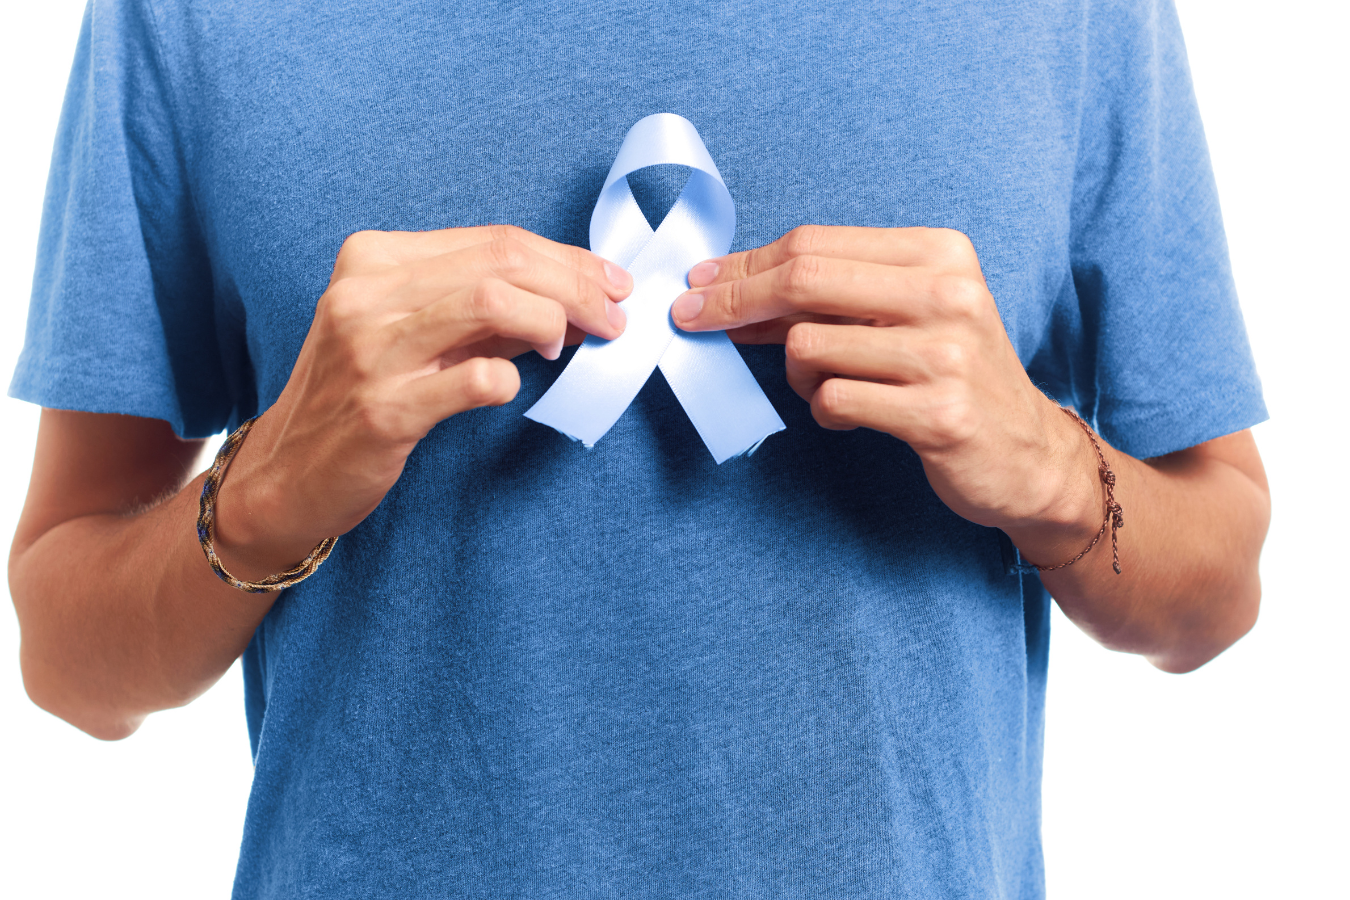 A man proudly holding a blue ribbon for health research charity. Sparkrock 365 ERP aids health charities, enhancing efficiency and dedicating more time and resources to critical research initiatives.